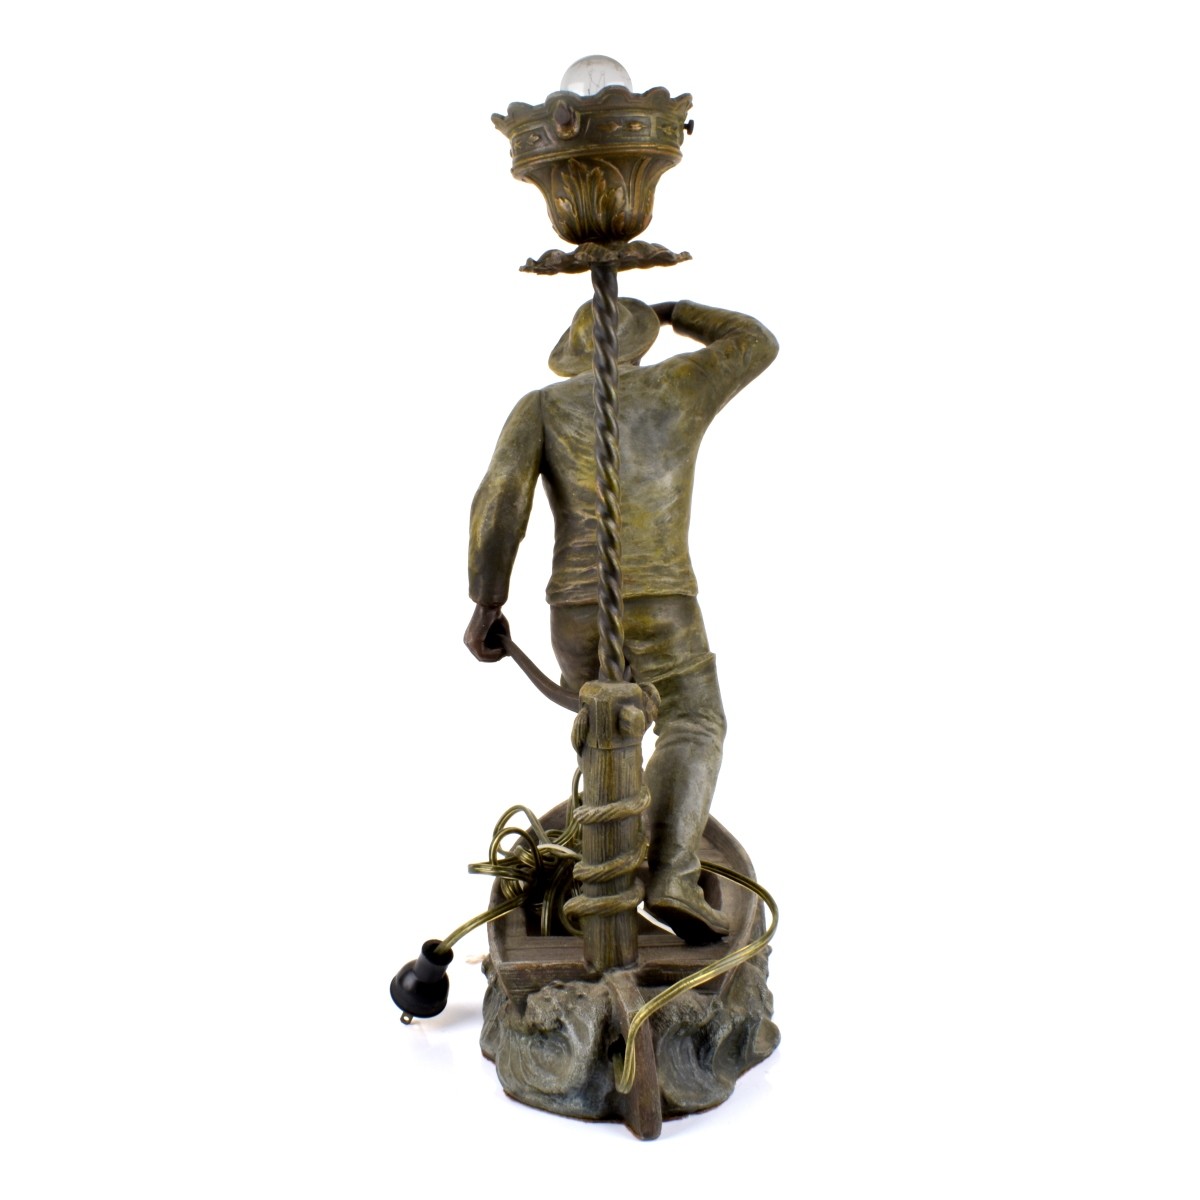 Antique French Spelter Sculpture as a Lamp